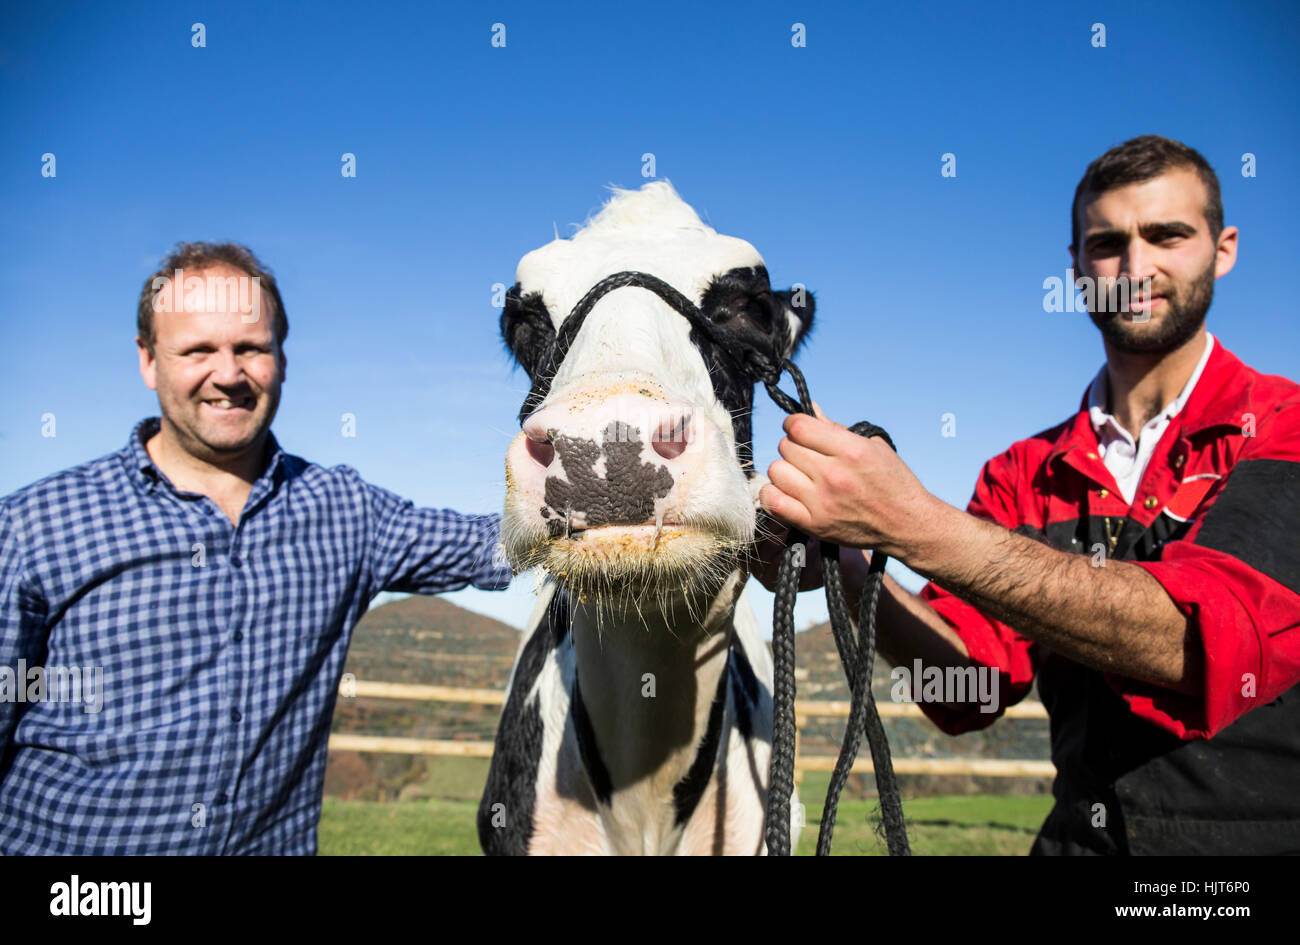 Portrait of two farmers with cow Stock Photo